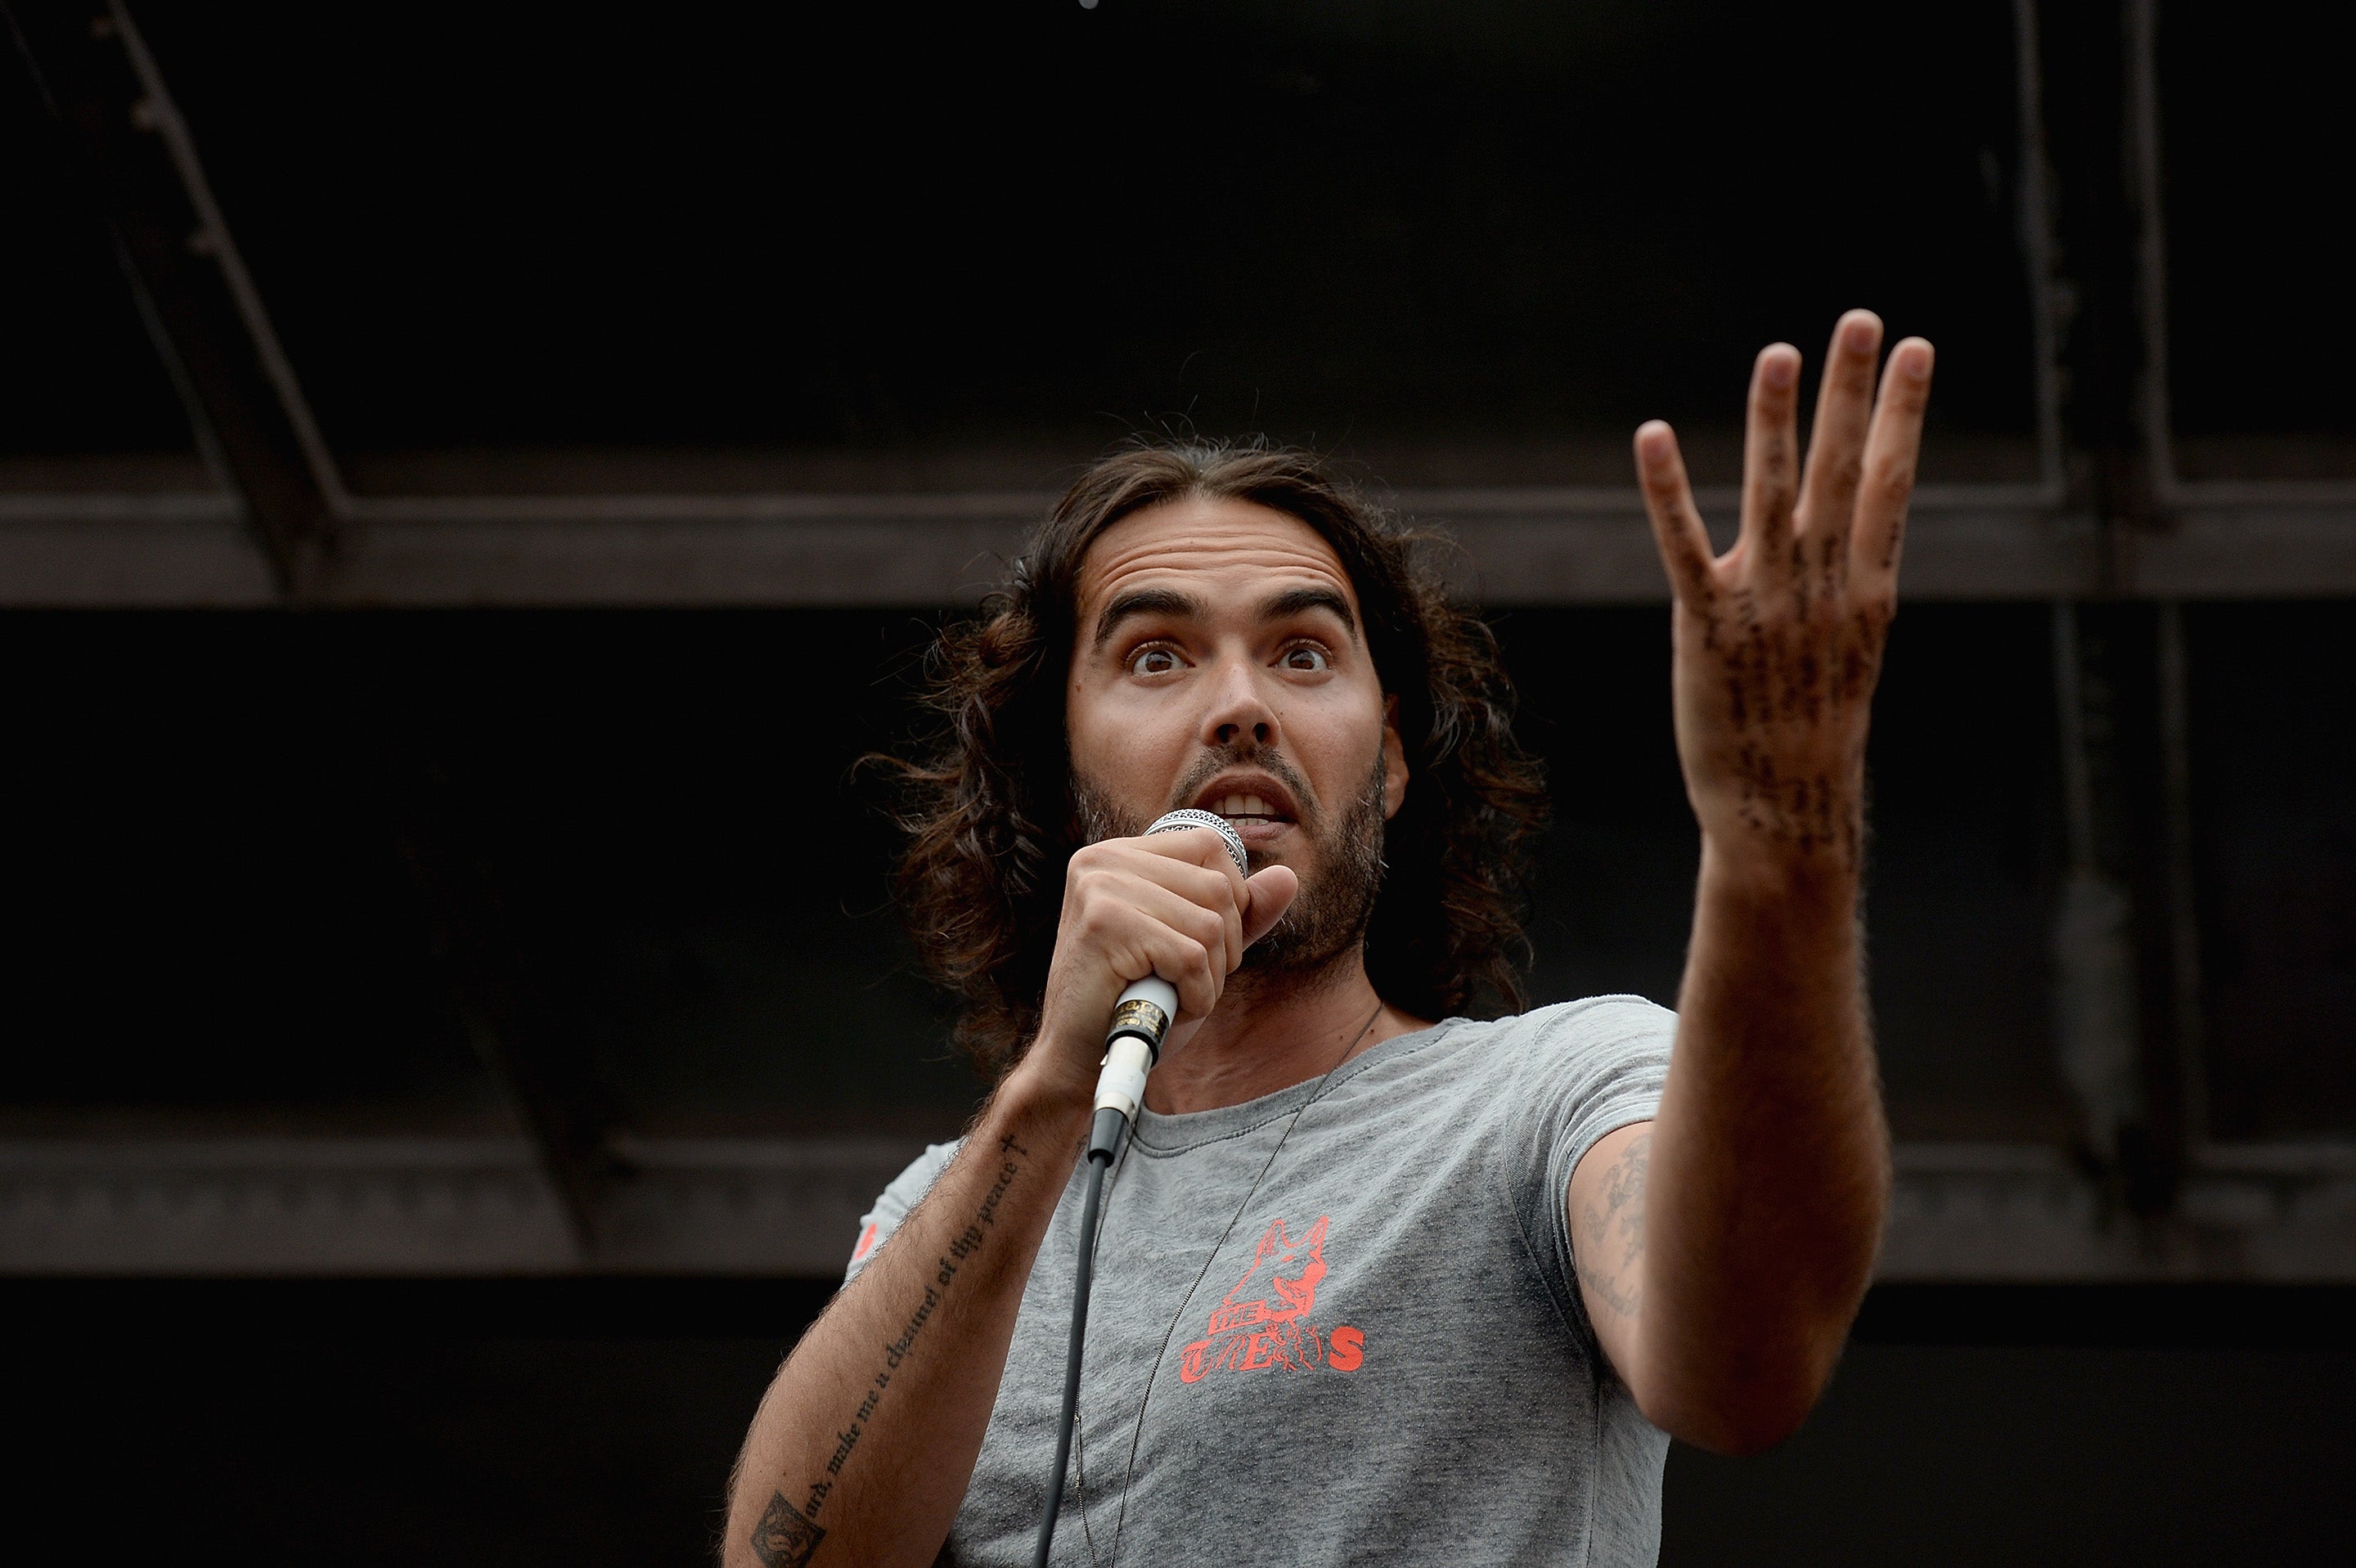 Russell Brand has denied all the allegations against him